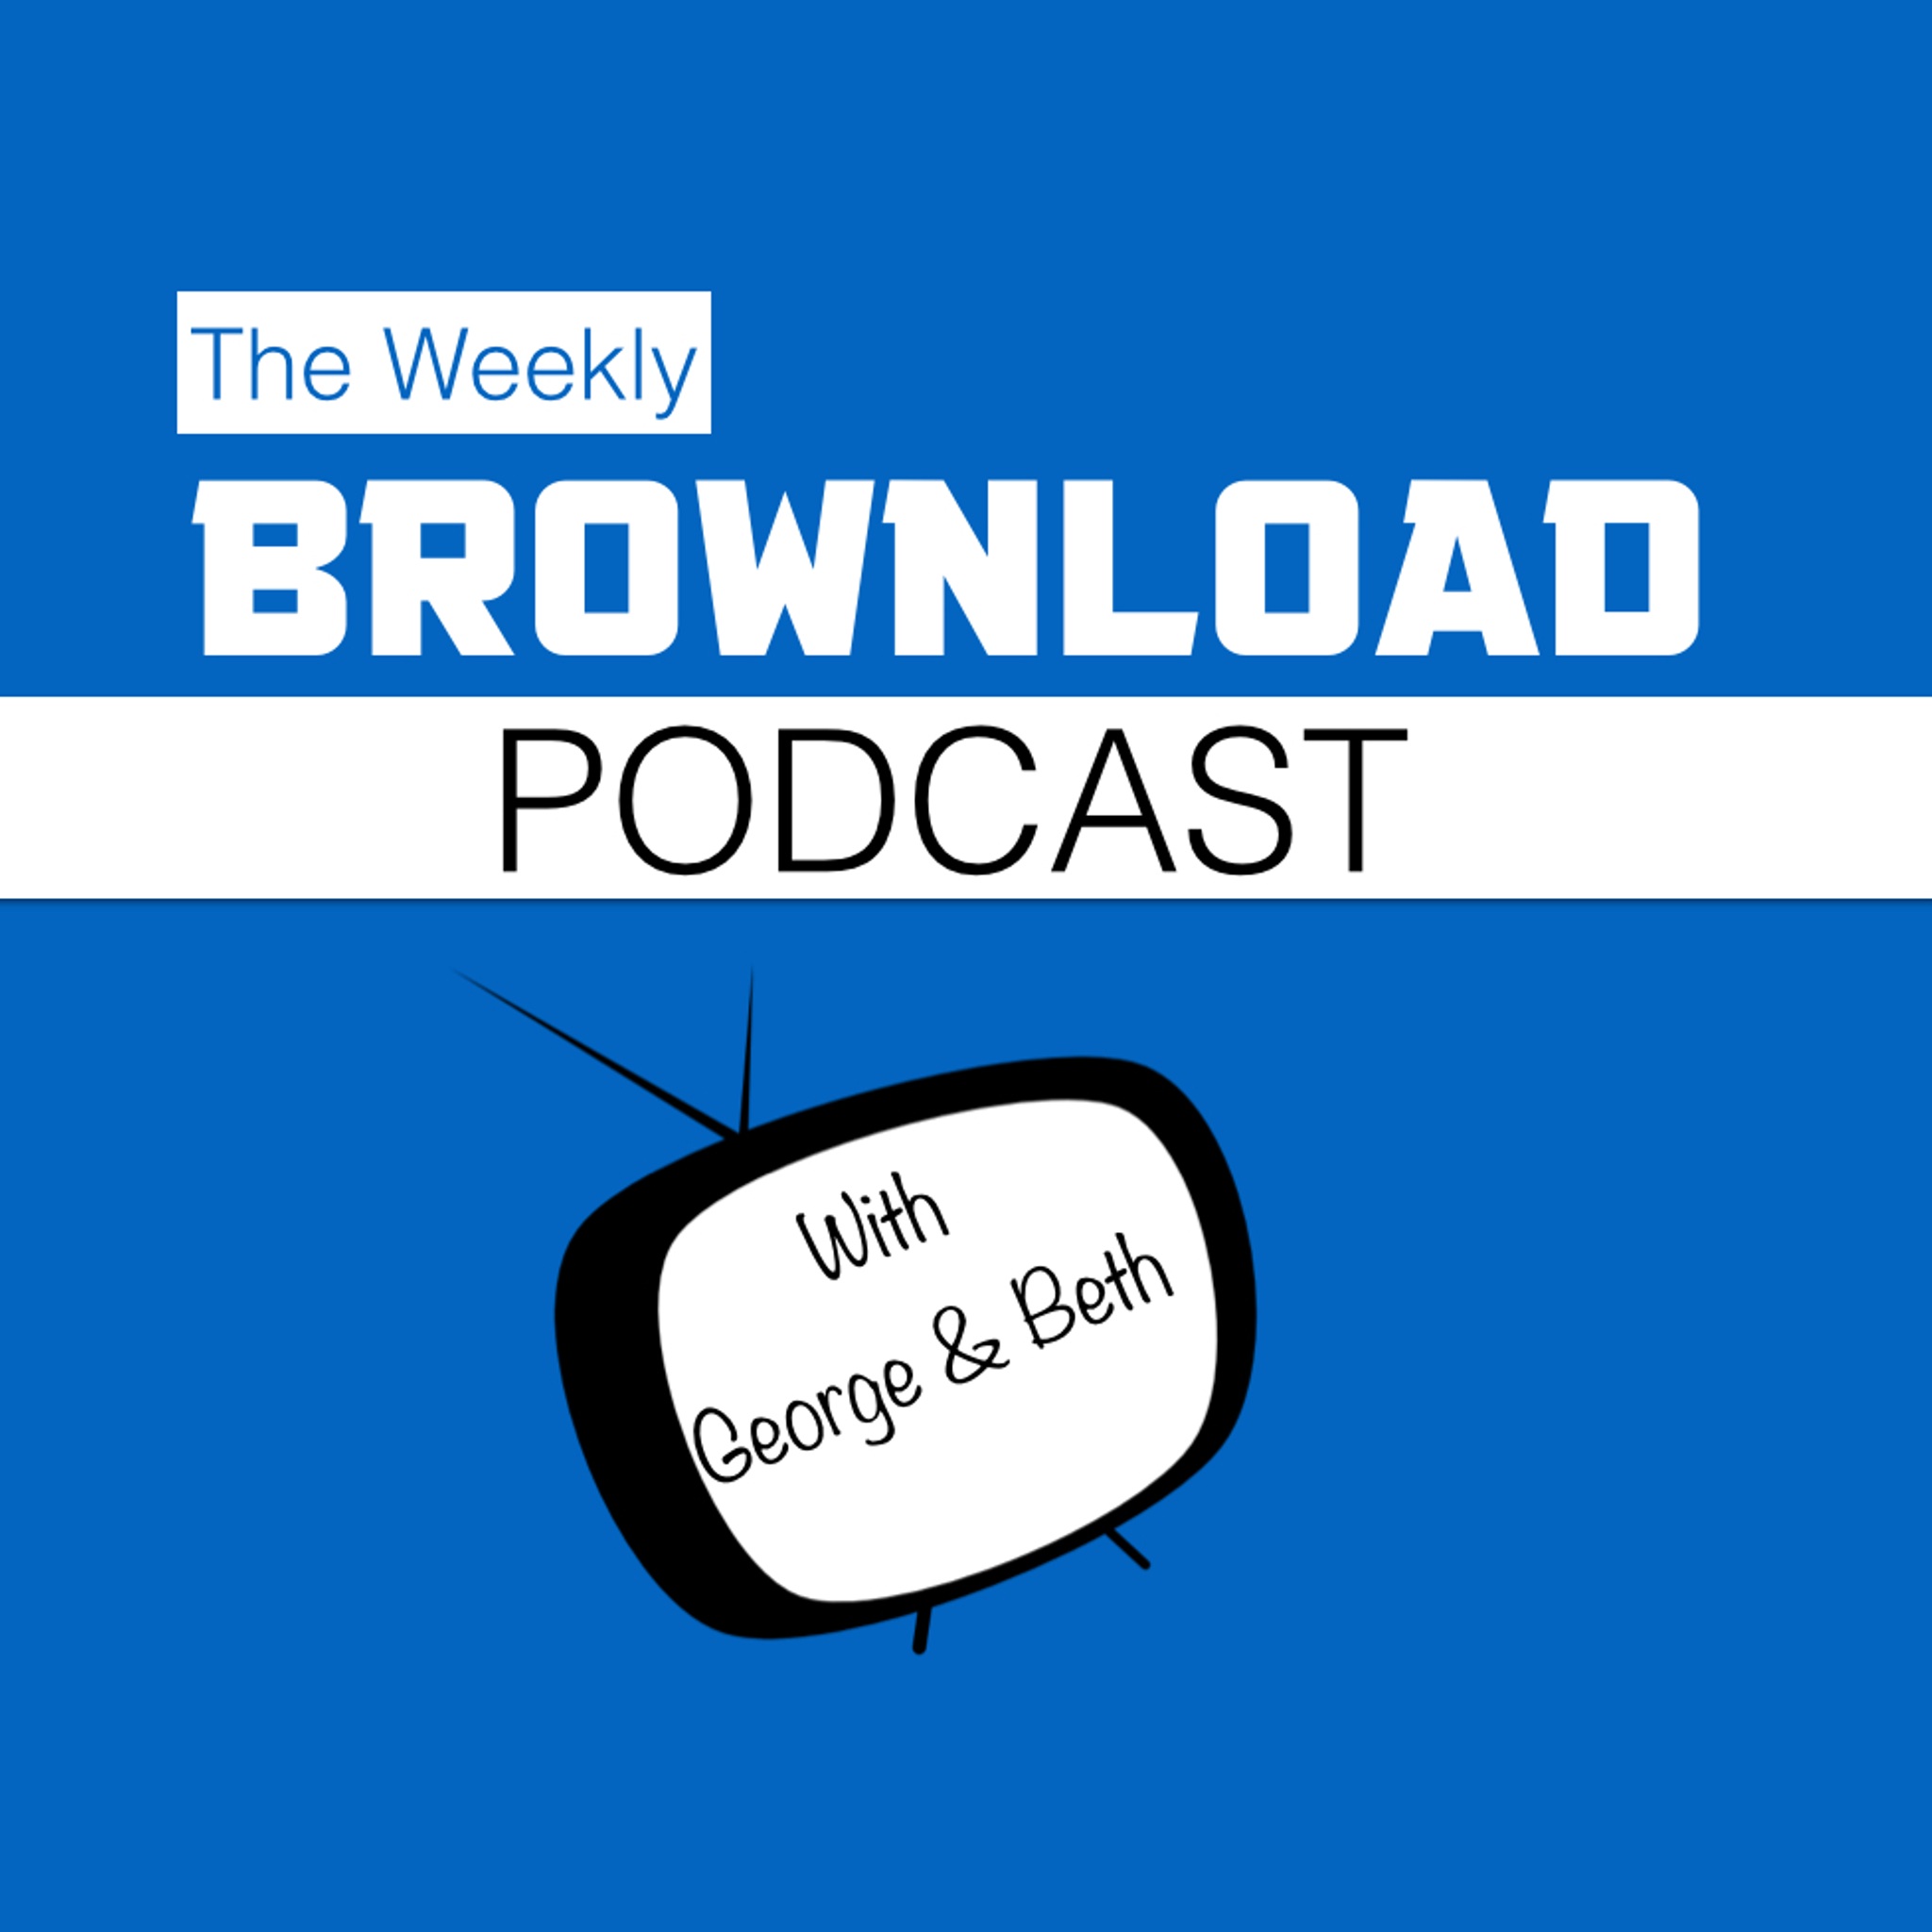 The Brownload Podcast